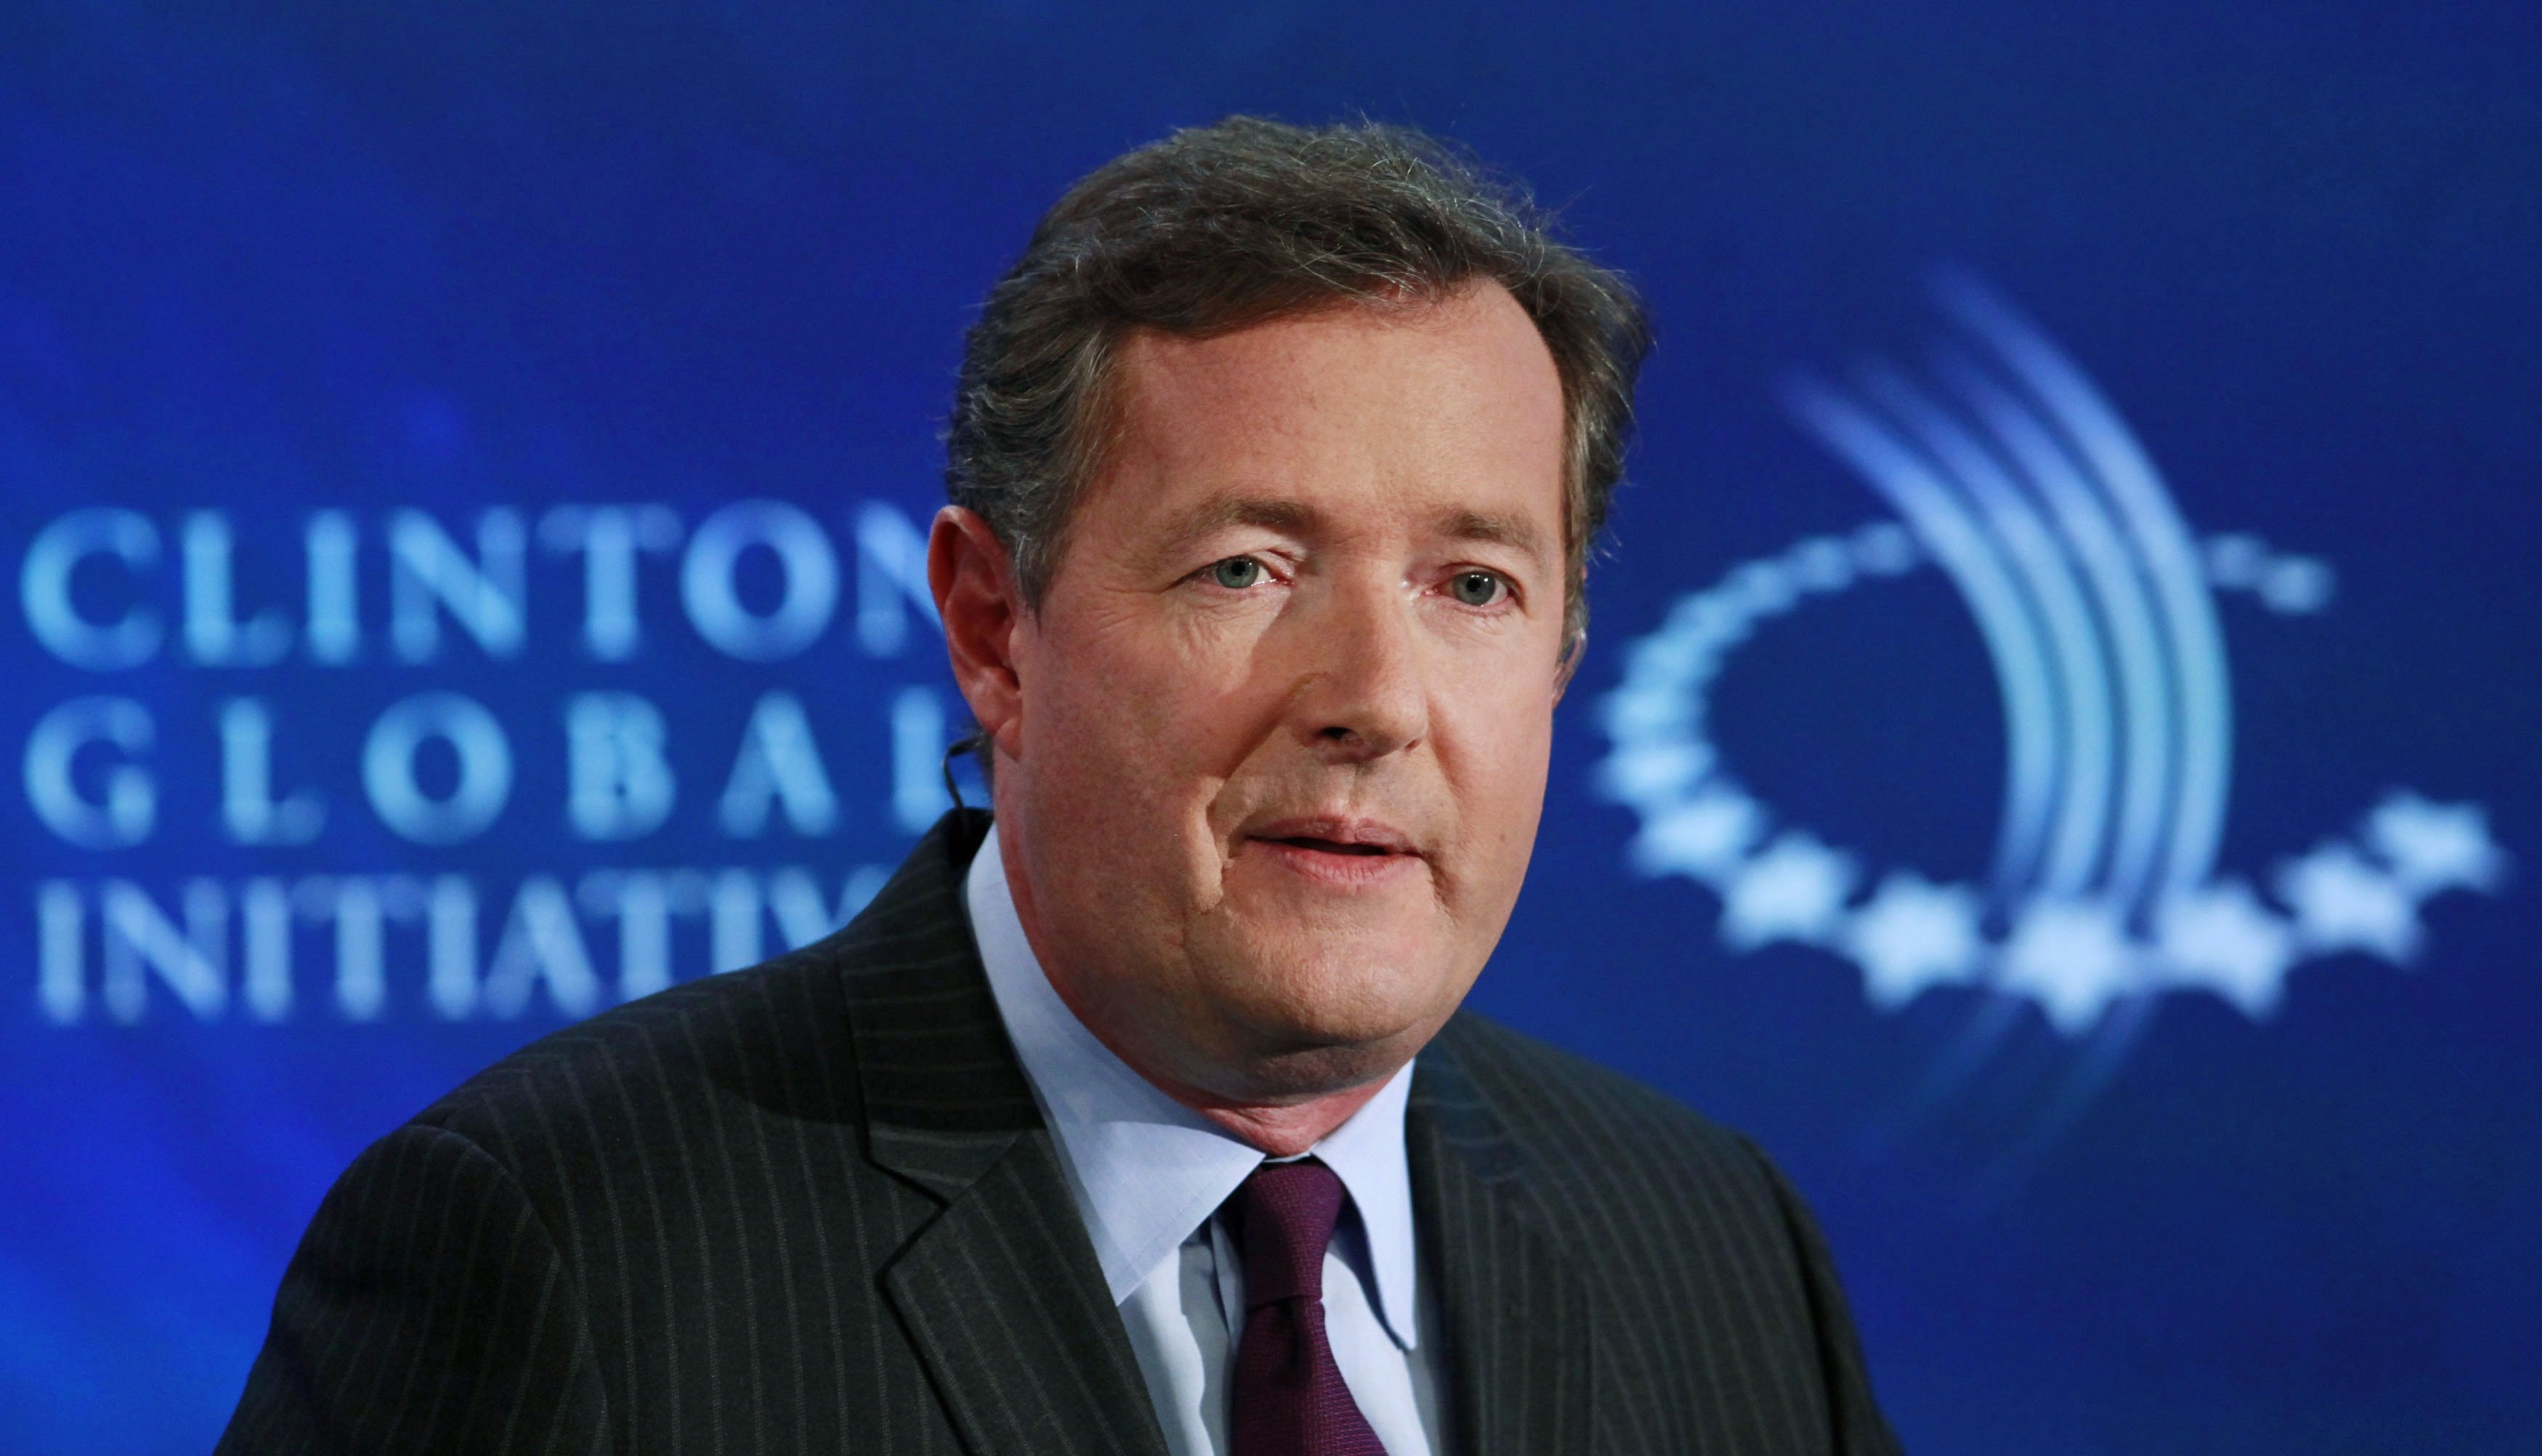 Television host Piers Morgan during the Clinton Global Initiative 2012 (CGI) in New York City, on Sept. 25, 2012. (Andrew Burton—Reuters)